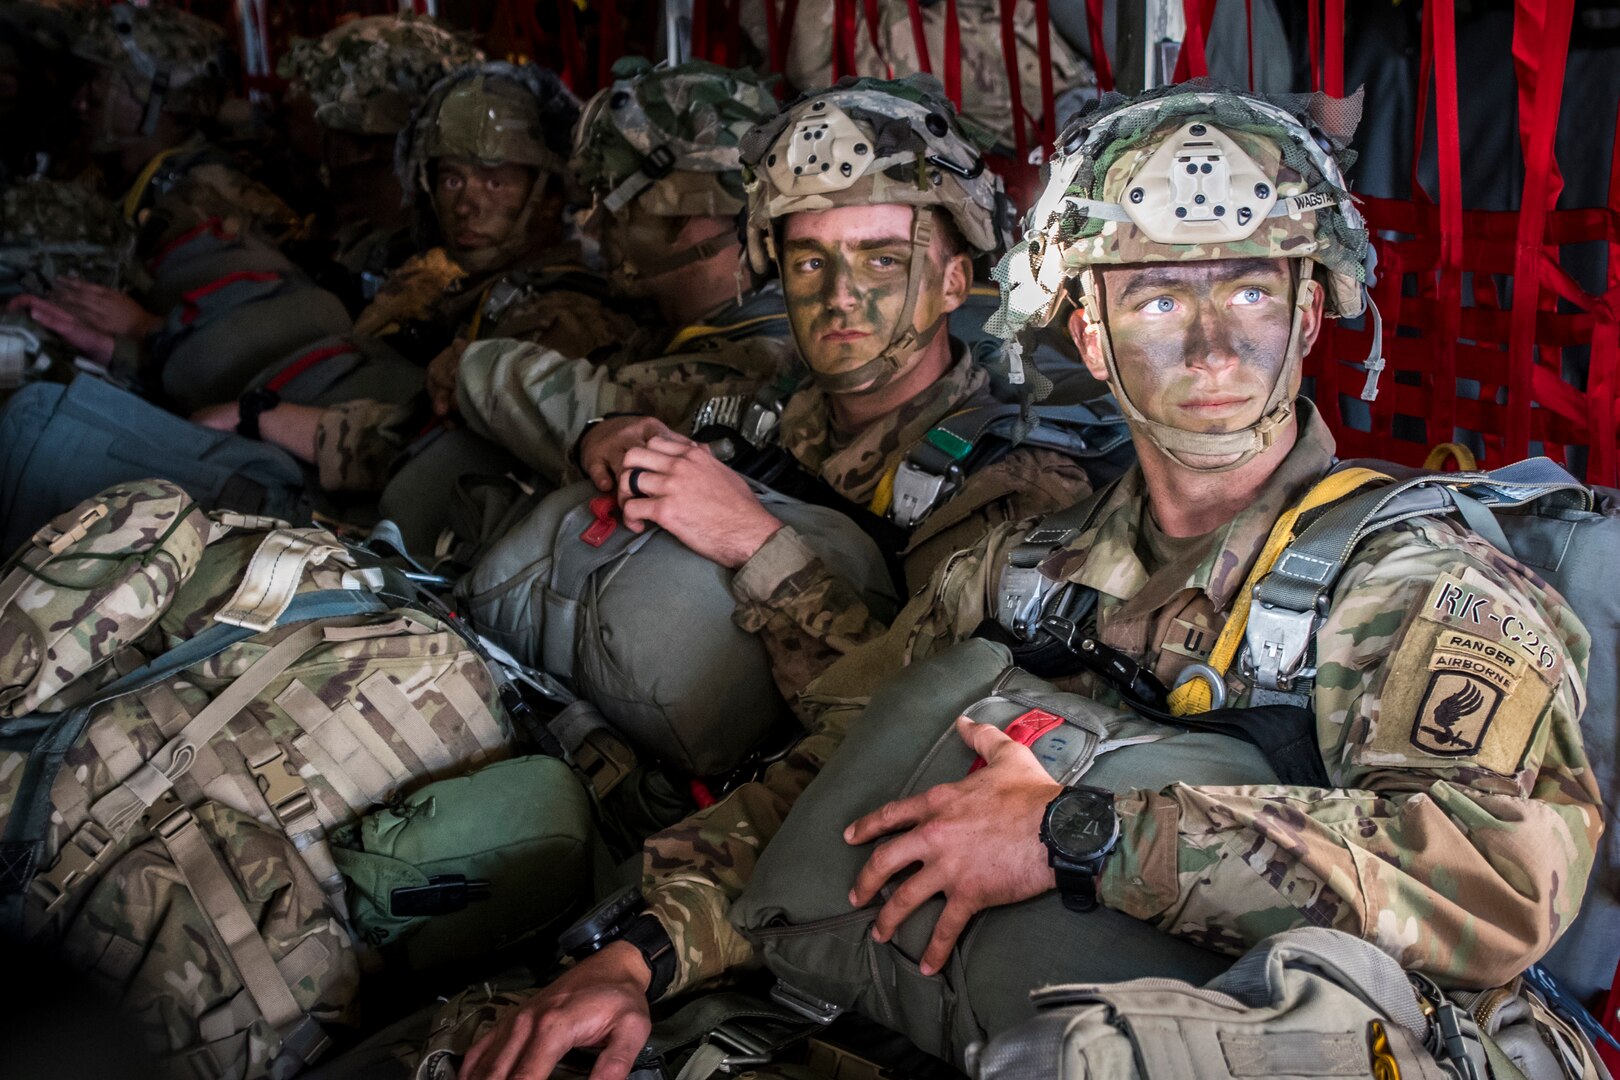 Soldiers from the U.S. Army's 173rd Infantry Airborne Brigade prepare for an airdrop during Saber Junction 2019 (SJ19) September 18, 2019, at Ramstein Air Base, Germany. SJ19, an exercise involving nearly 5,400 participants from 16 ally and partner nations and the U.S. Army's Grafenwoehr and Hohenfels Training Areas, is designed to assess the readiness of the U.S. Army's 173rd Infantry Airborne Brigade to execute land operations in a joint environment and to promote interoperability with allies and partner nations.